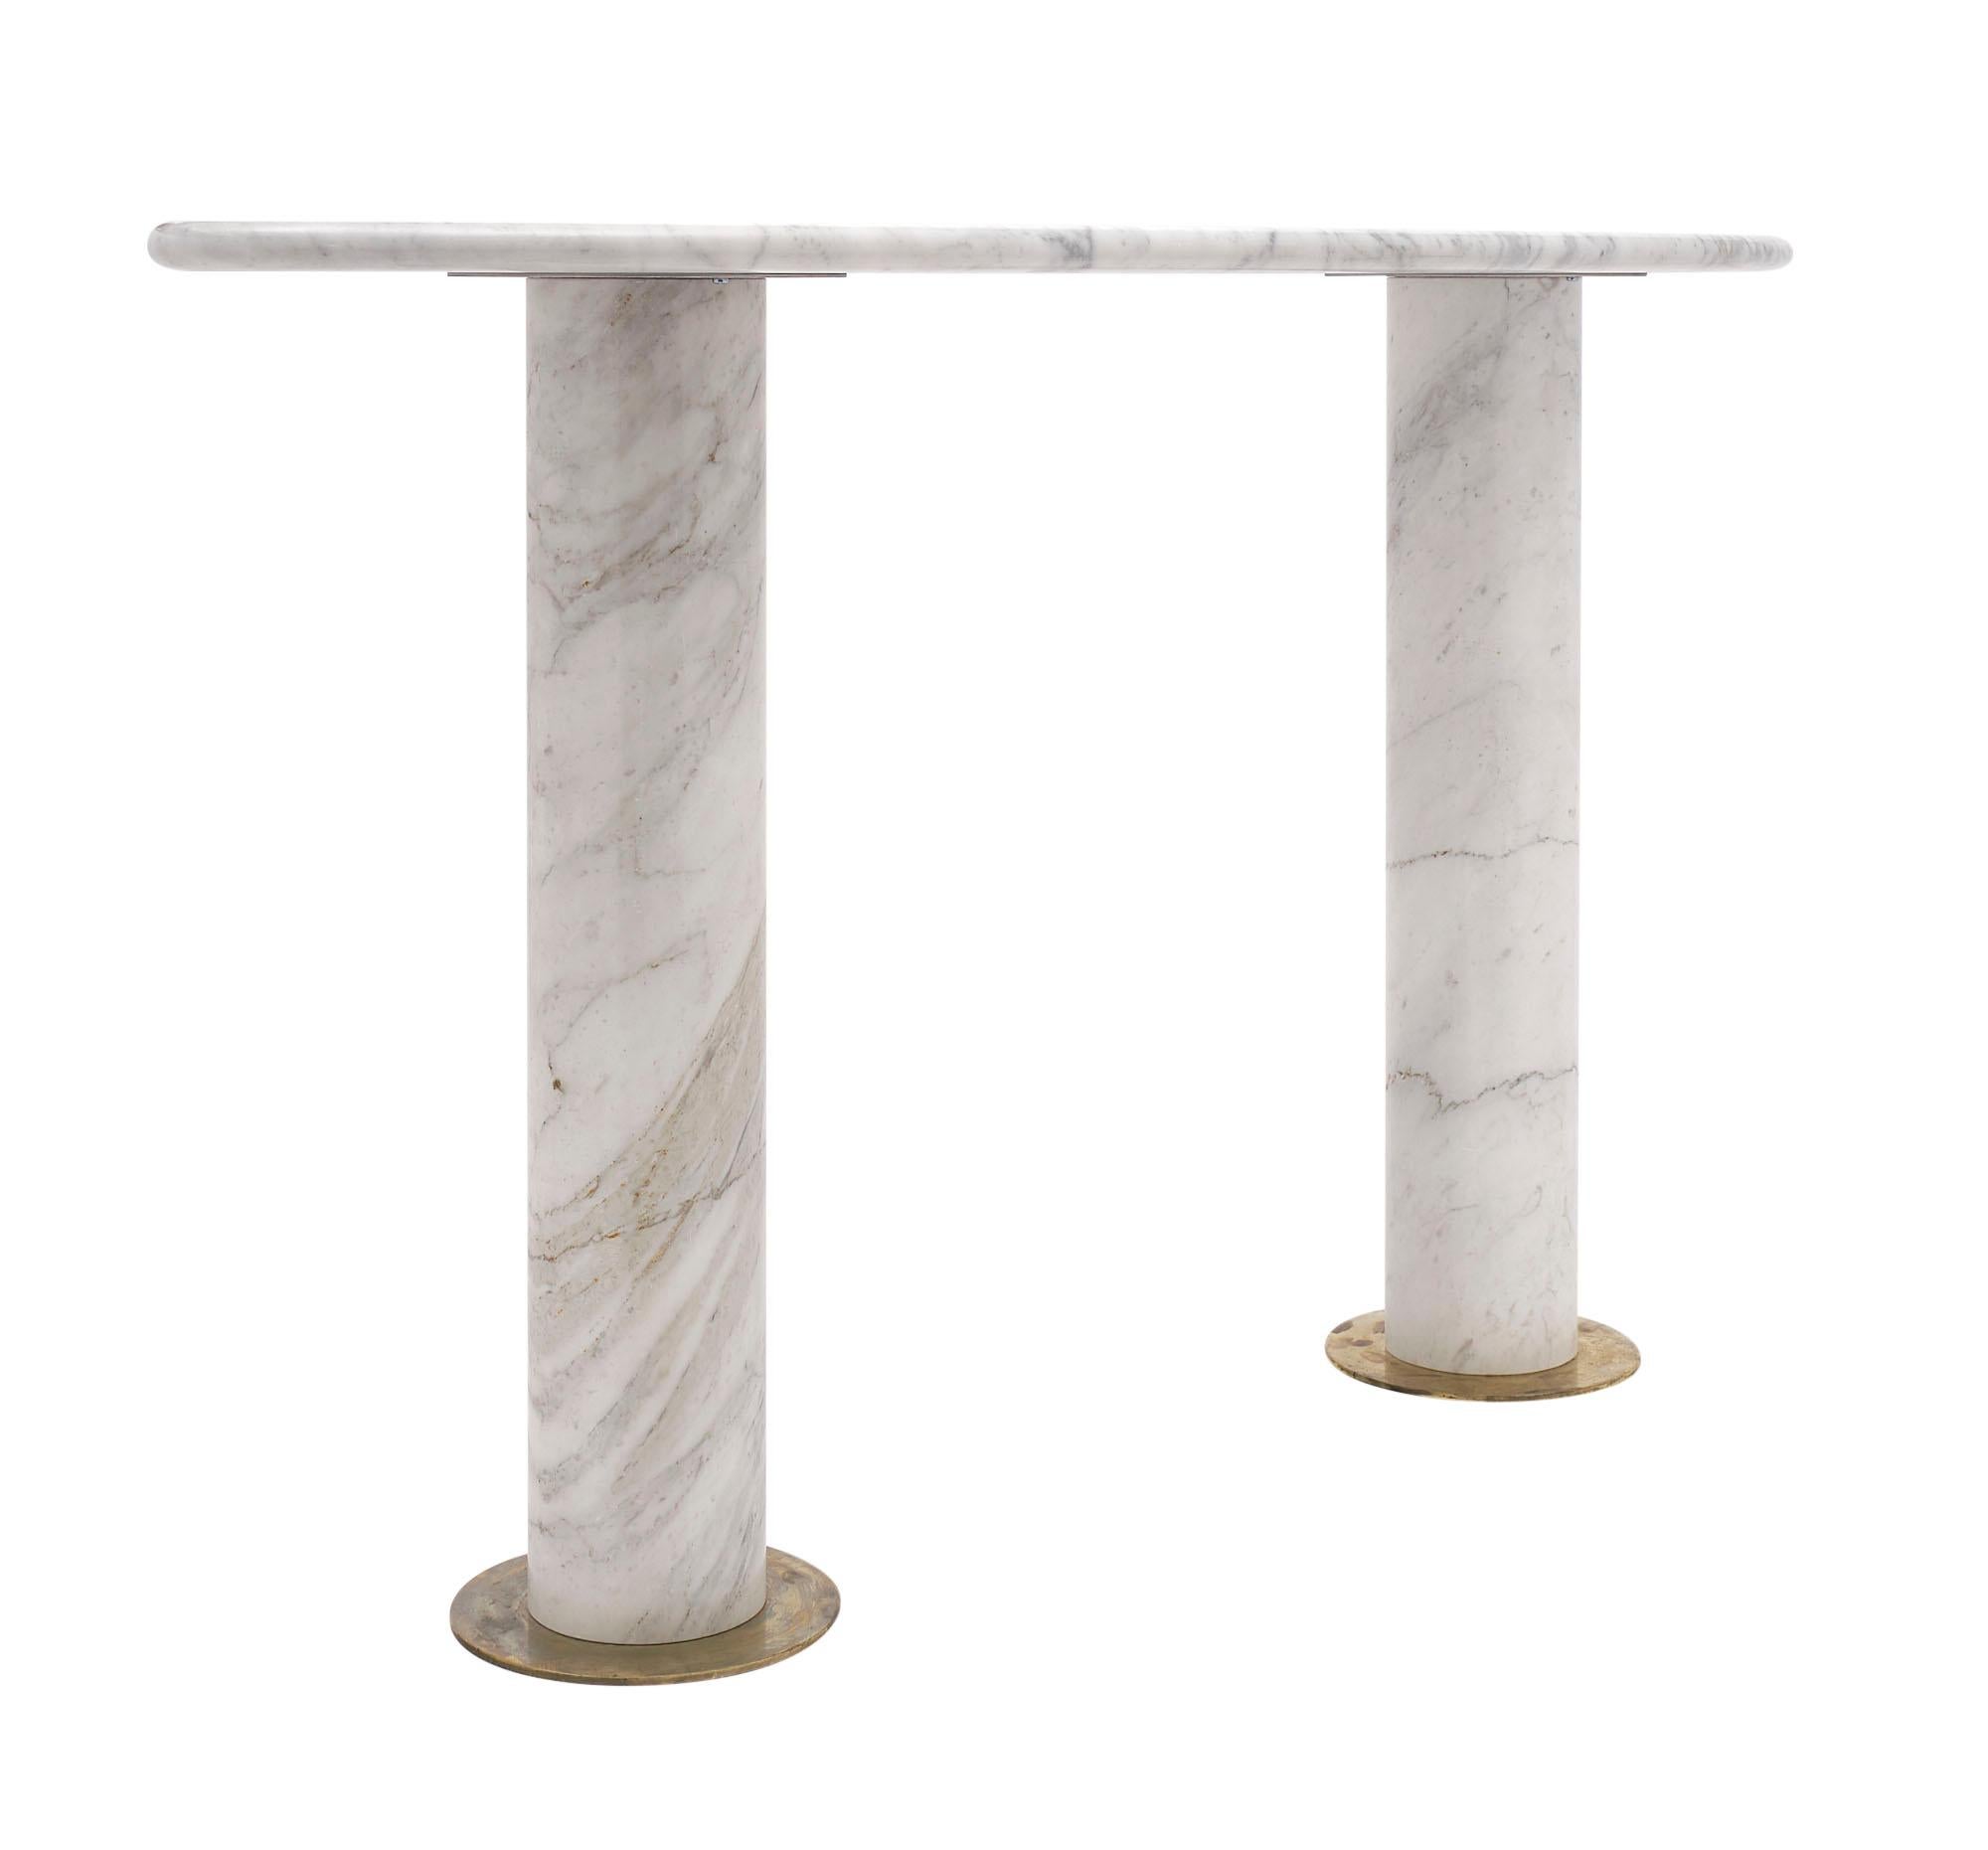 Console from Italy made of veined Carrara marble. The oval slab top fits securely on two marble pedestals and each has a brass base.